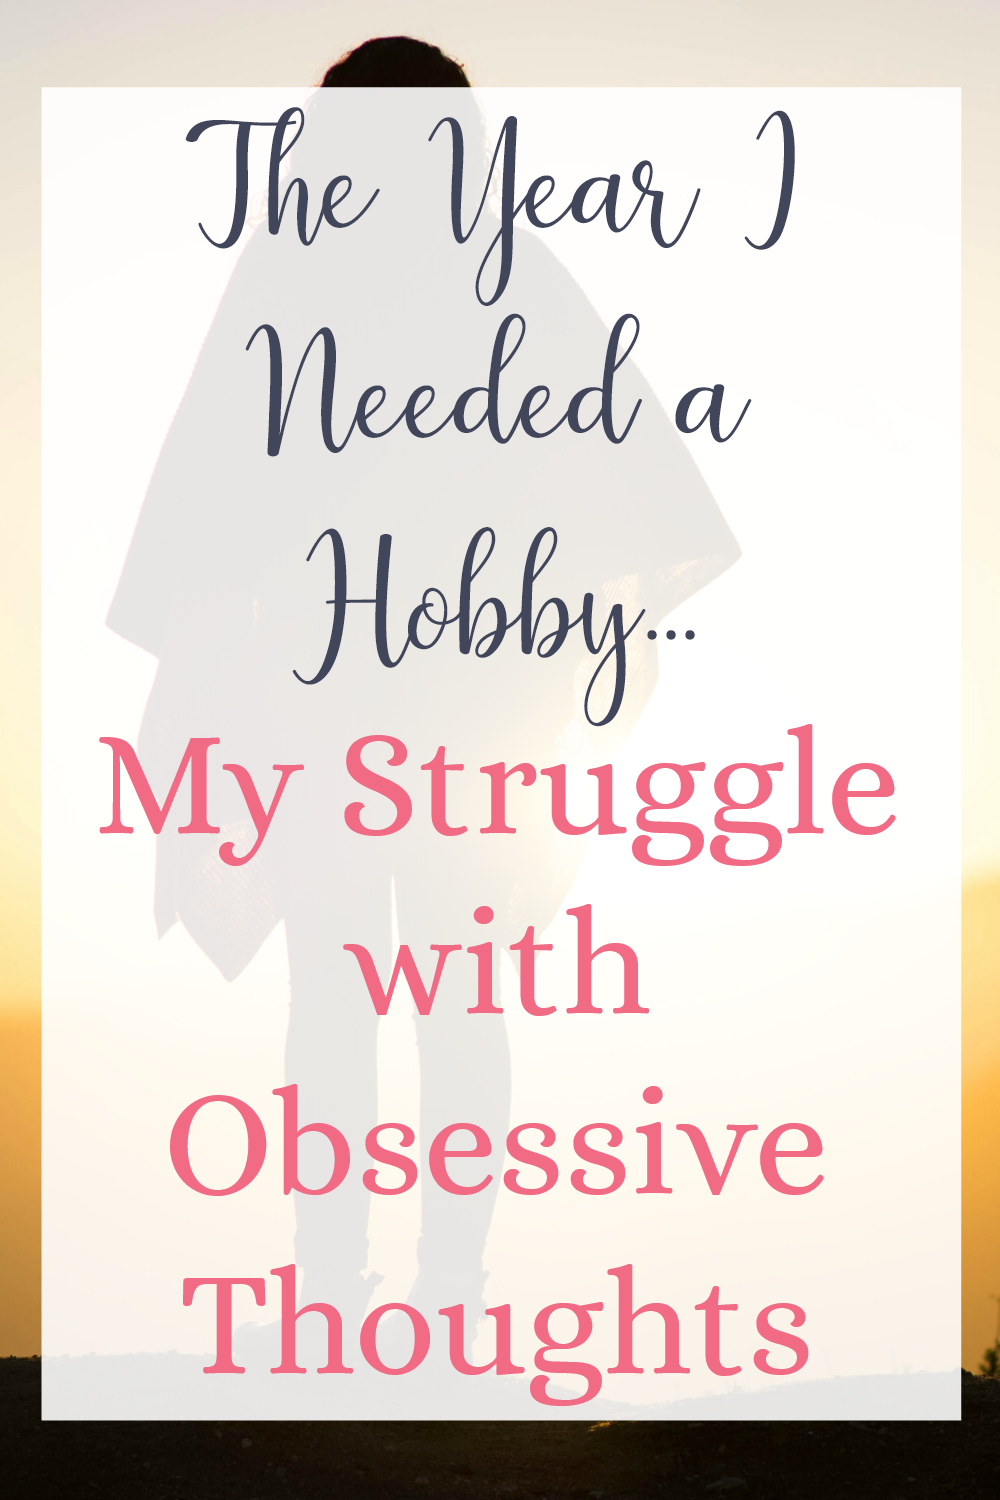 The year I needed a hobby to begin the process of breaking free from obsessive thoughts.